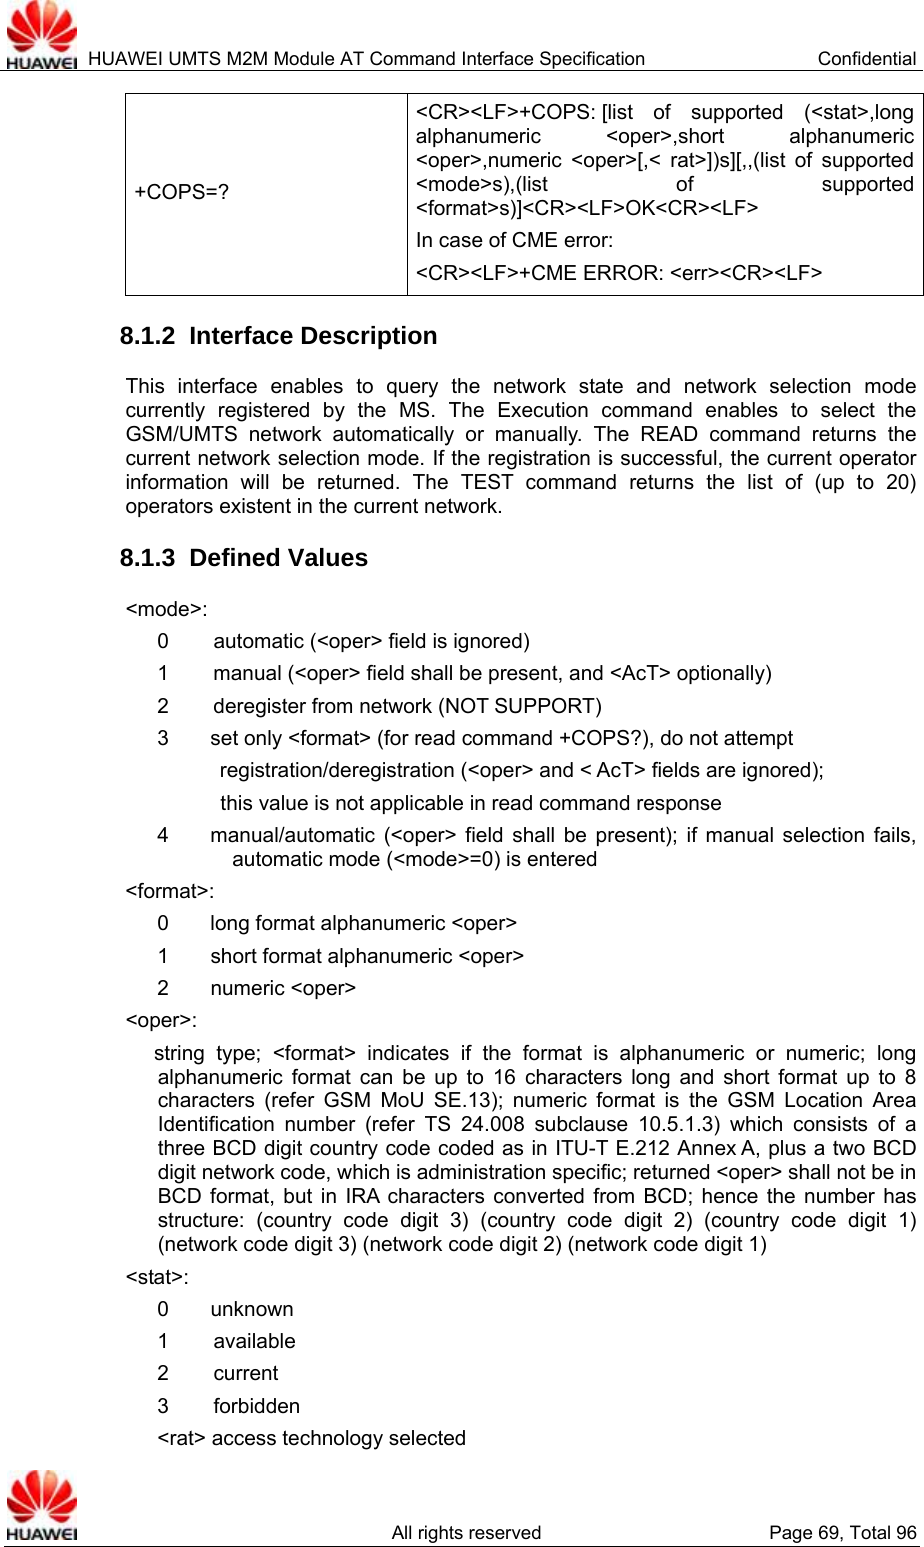  HUAWEI UMTS M2M Module AT Command Interface Specification  Confidential   All rights reserved  Page 69, Total 96 +COPS=? &lt;CR&gt;&lt;LF&gt;+COPS: [list  of supported (&lt;stat&gt;,long alphanumeric &lt;oper&gt;,short alphanumeric &lt;oper&gt;,numeric &lt;oper&gt;[,&lt; rat&gt;])s][,,(list of supported &lt;mode&gt;s),(list of supported &lt;format&gt;s)]&lt;CR&gt;&lt;LF&gt;OK&lt;CR&gt;&lt;LF&gt; In case of CME error:   &lt;CR&gt;&lt;LF&gt;+CME ERROR: &lt;err&gt;&lt;CR&gt;&lt;LF&gt; 8.1.2  Interface Description This interface enables to query the network state and network selection mode currently registered by the MS. The Execution command enables to select the GSM/UMTS network automatically or manually. The READ command returns the current network selection mode. If the registration is successful, the current operator information will be returned. The TEST command returns the list of (up to 20) operators existent in the current network.     8.1.3  Defined Values &lt;mode&gt;: 0        automatic (&lt;oper&gt; field is ignored) 1        manual (&lt;oper&gt; field shall be present, and &lt;AcT&gt; optionally) 2        deregister from network (NOT SUPPORT) 3        set only &lt;format&gt; (for read command +COPS?), do not attempt registration/deregistration (&lt;oper&gt; and &lt; AcT&gt; fields are ignored);   this value is not applicable in read command response 4    manual/automatic (&lt;oper&gt; field shall be present); if manual selection fails, automatic mode (&lt;mode&gt;=0) is entered &lt;format&gt;: 0    long format alphanumeric &lt;oper&gt; 1    short format alphanumeric &lt;oper&gt; 2    numeric &lt;oper&gt; &lt;oper&gt;:    string type; &lt;format&gt; indicates if the format is alphanumeric or numeric; long alphanumeric format can be up to 16 characters long and short format up to 8 characters (refer GSM MoU SE.13); numeric format is the GSM Location Area Identification number (refer TS 24.008 subclause 10.5.1.3) which consists of a three BCD digit country code coded as in ITU-T E.212 Annex A, plus a two BCD digit network code, which is administration specific; returned &lt;oper&gt; shall not be in BCD format, but in IRA characters converted from BCD; hence the number has structure: (country code digit 3) (country code digit 2) (country code digit 1) (network code digit 3) (network code digit 2) (network code digit 1) &lt;stat&gt;: 0    unknown 1     available 2     current 3     forbidden &lt;rat&gt; access technology selected 